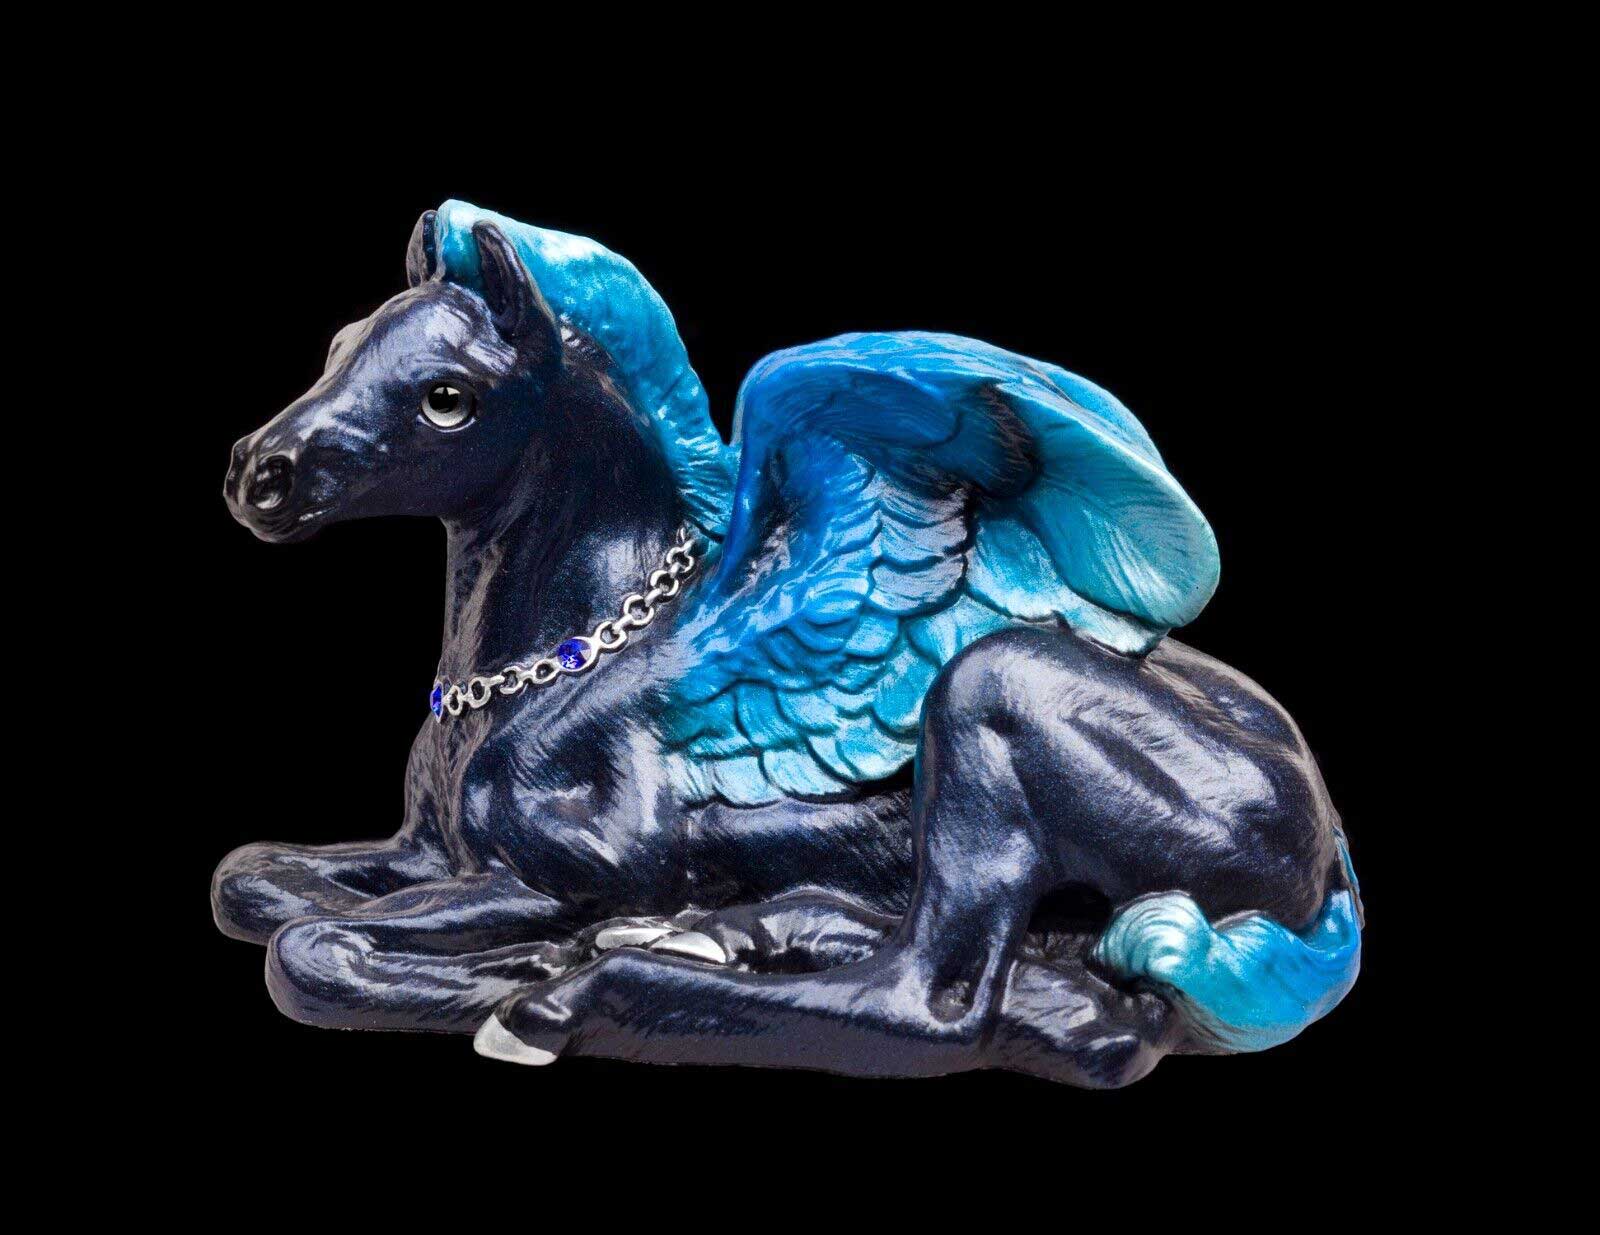 20221019-Twilight-Sapphire-Baby-Pegasus-Test-Paint-1-by-Gina